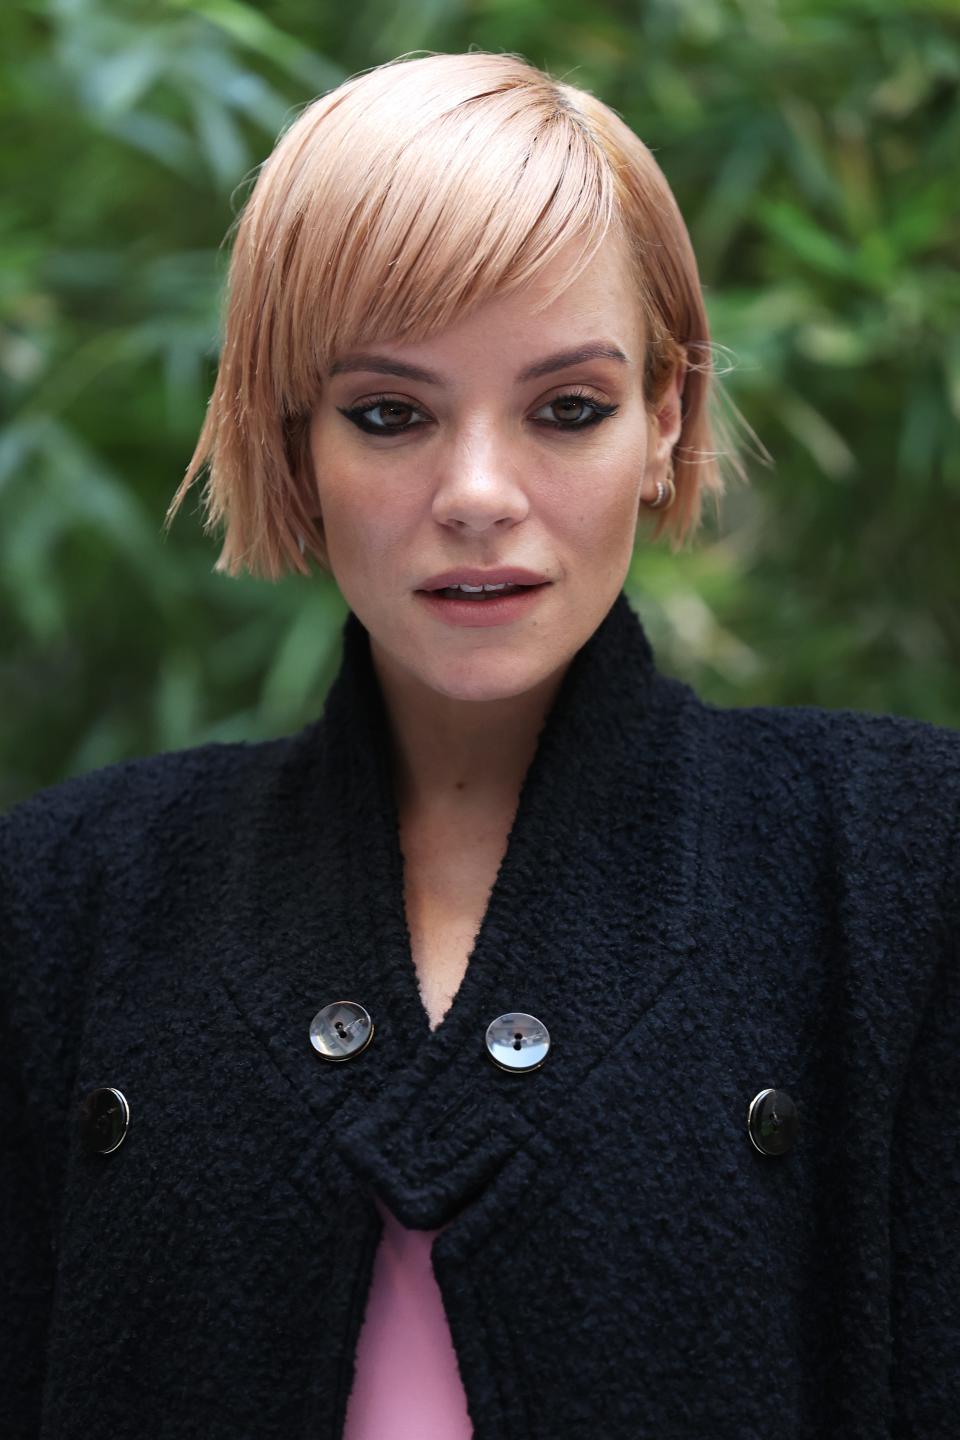 Lily Allen is calling out a rape joke at her expense made by comedians Russell Brand and others in 2007.